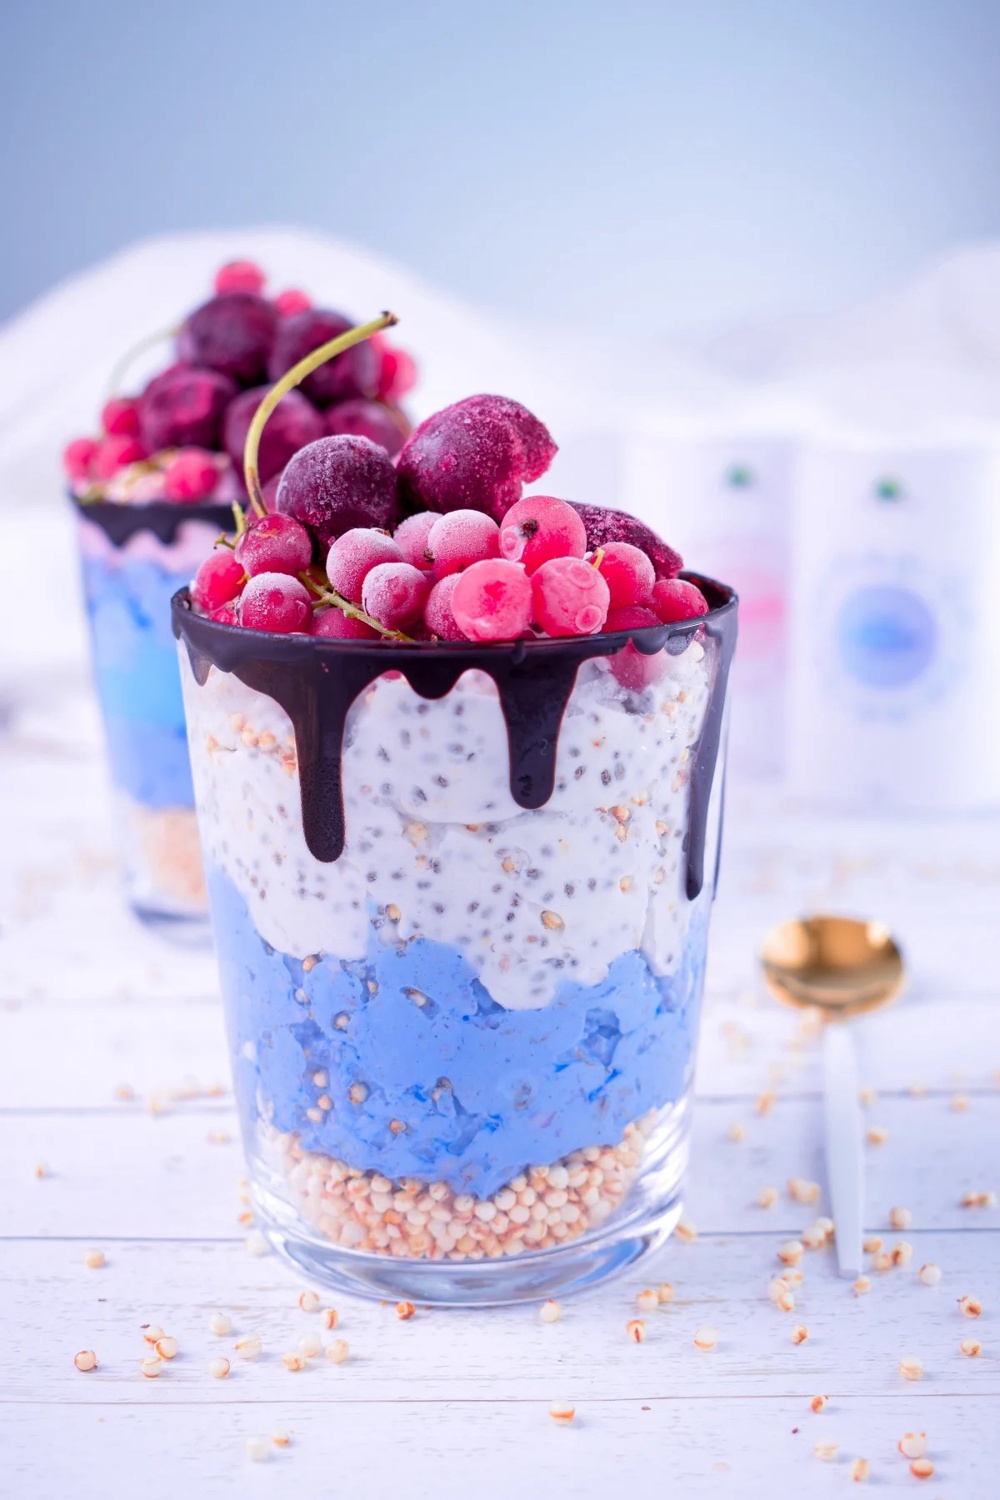 Breakfast with Coconut Chia Pudding and Overnight Oats